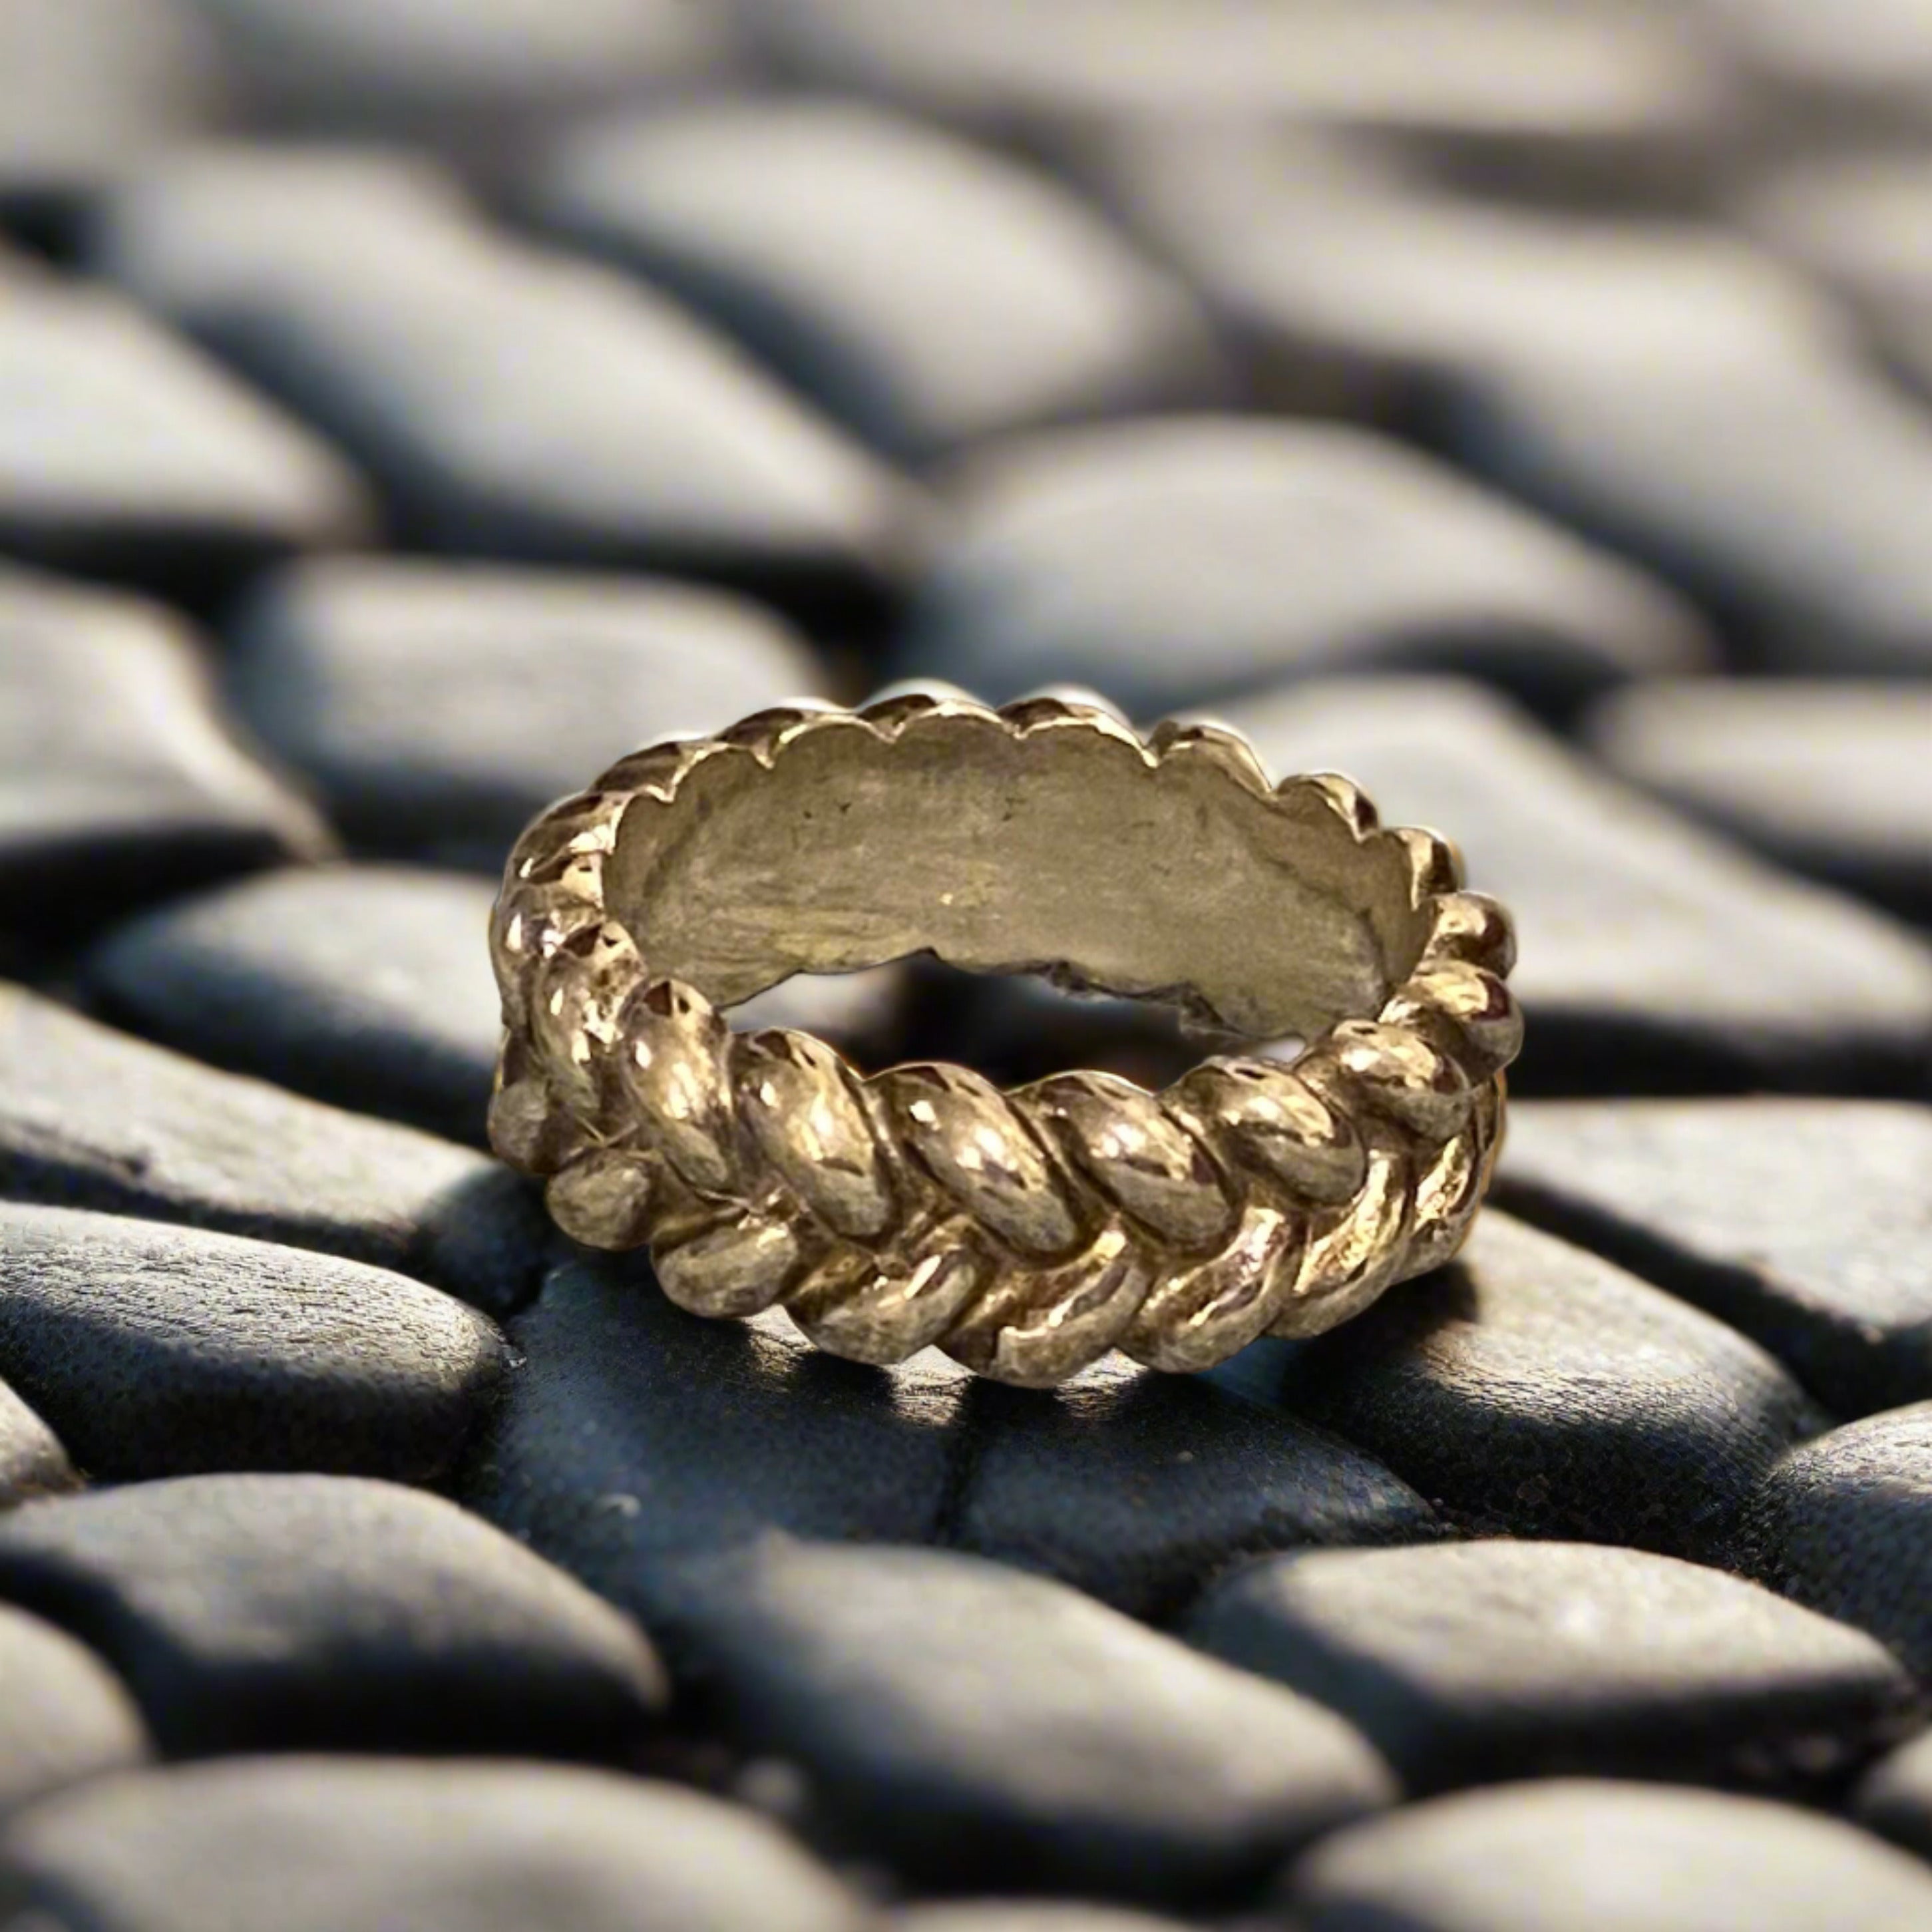 Clymene Braid Ring by ROMAE - Jewelry Inspired by Ancient Roman Designs ...